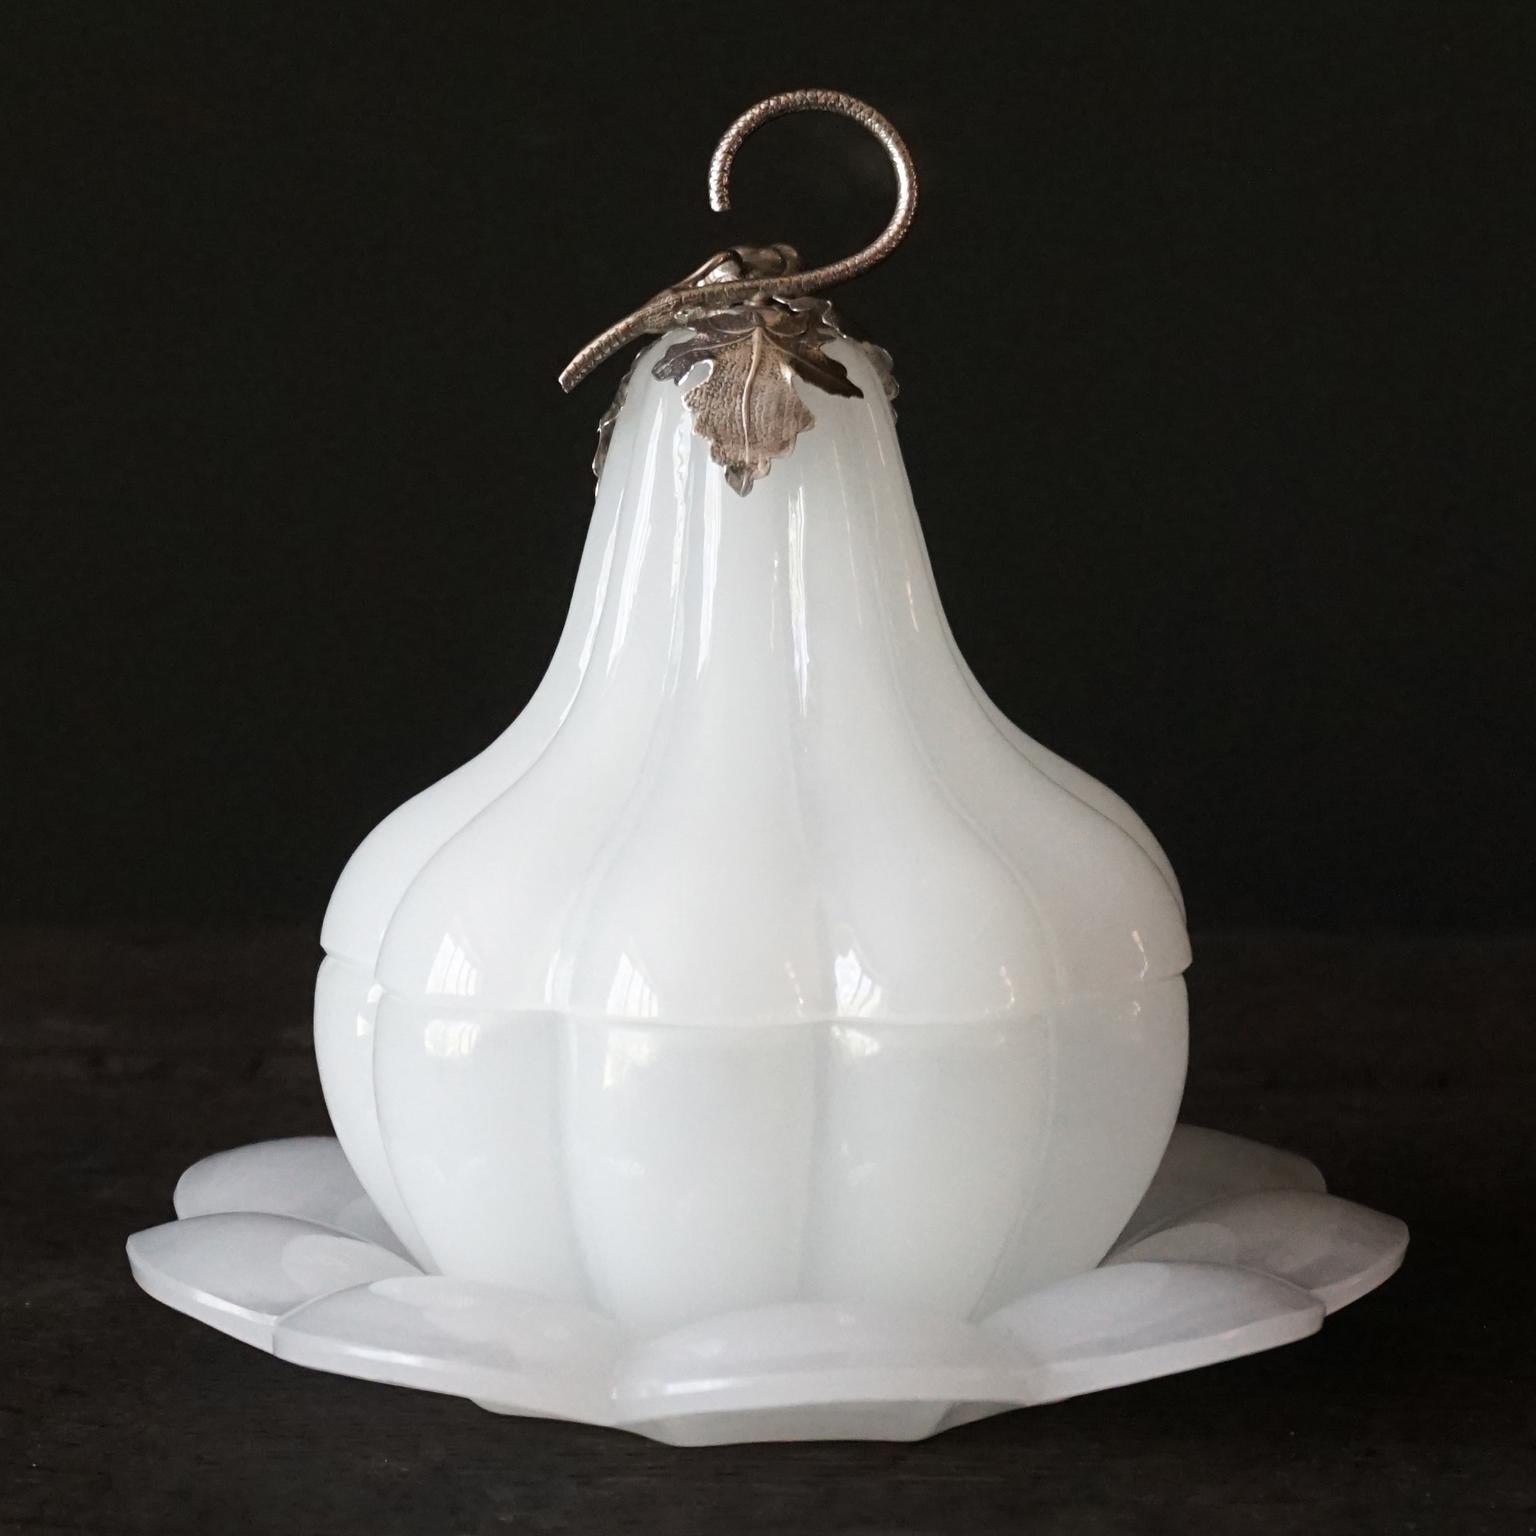 1950s White Opaline Glass Pear or Gourd Lidded Jar with Silver Grapes and Leaves In Good Condition For Sale In Haarlem, NL